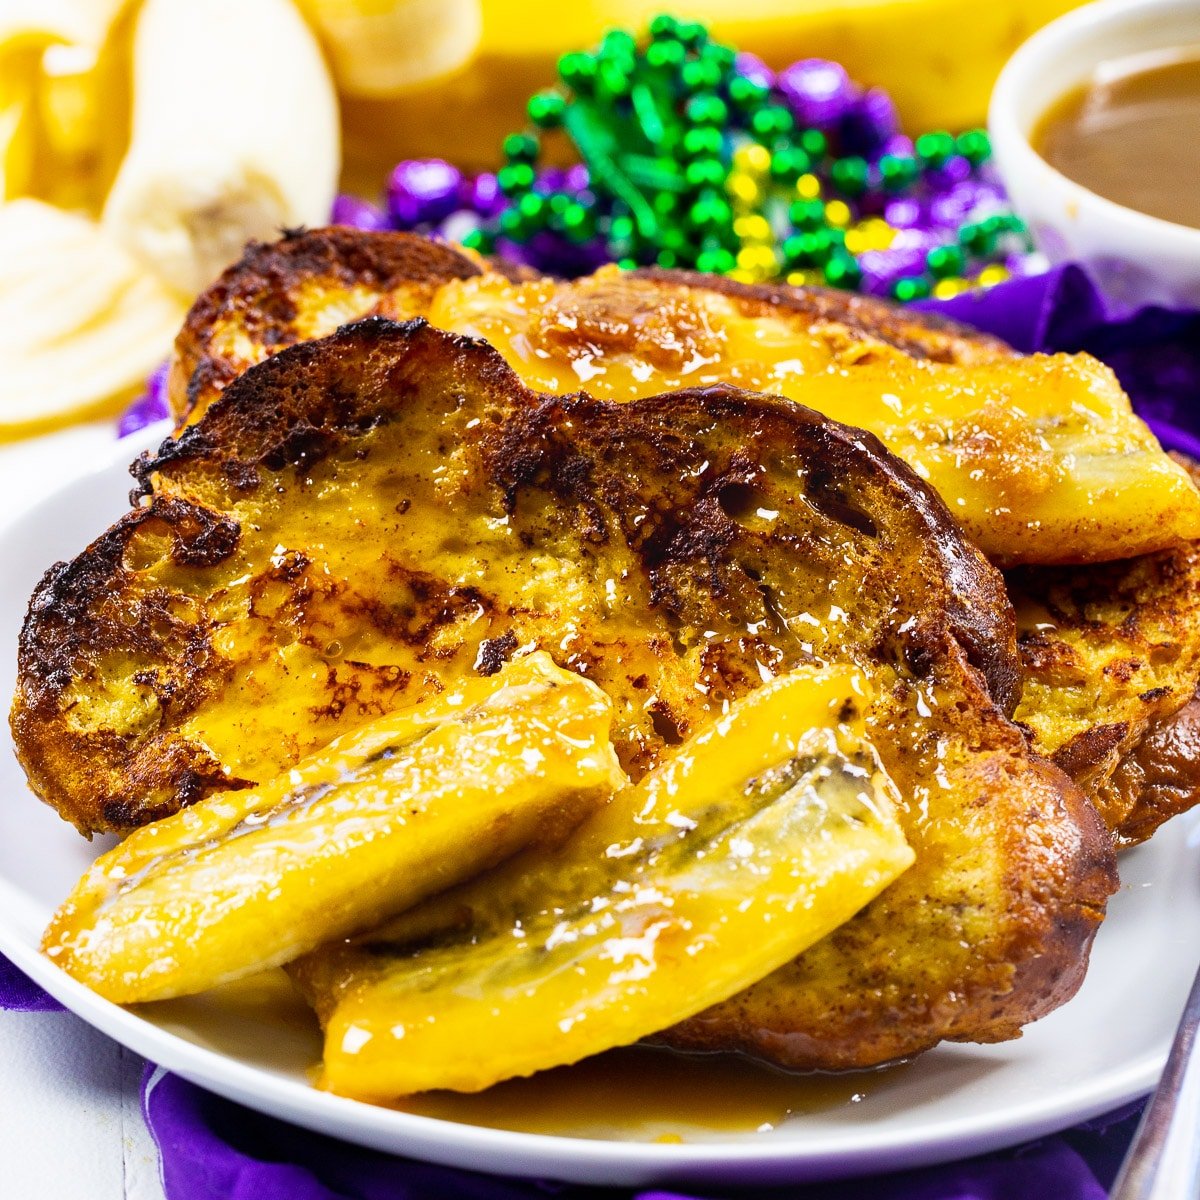 Bananas Foster French Toast on plate with Mardi gras Beads.